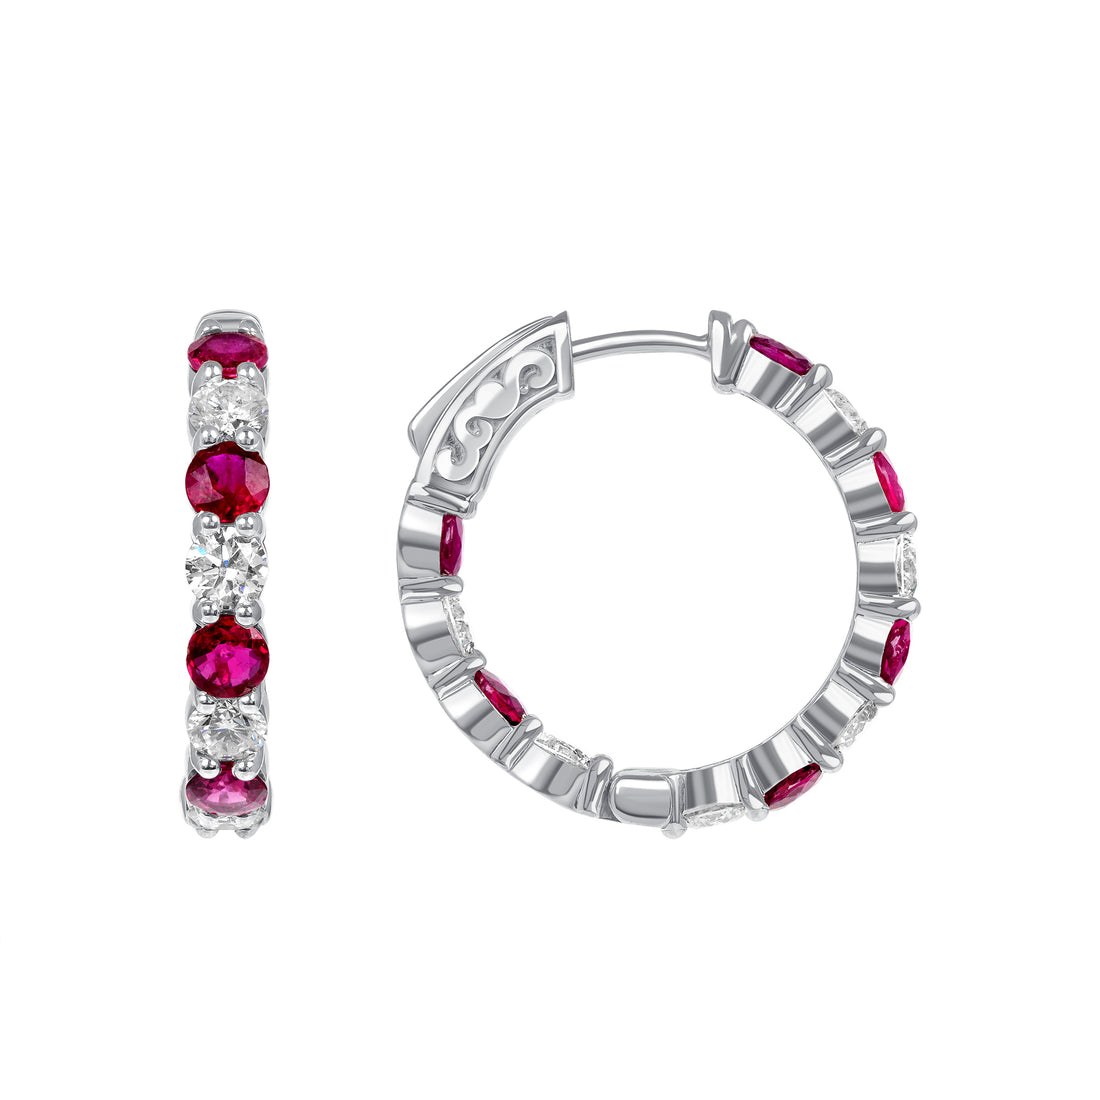 4.41 CT. Alternating Round Brilliant Diamond and Ruby Hoop Earrings in 14K White Gold